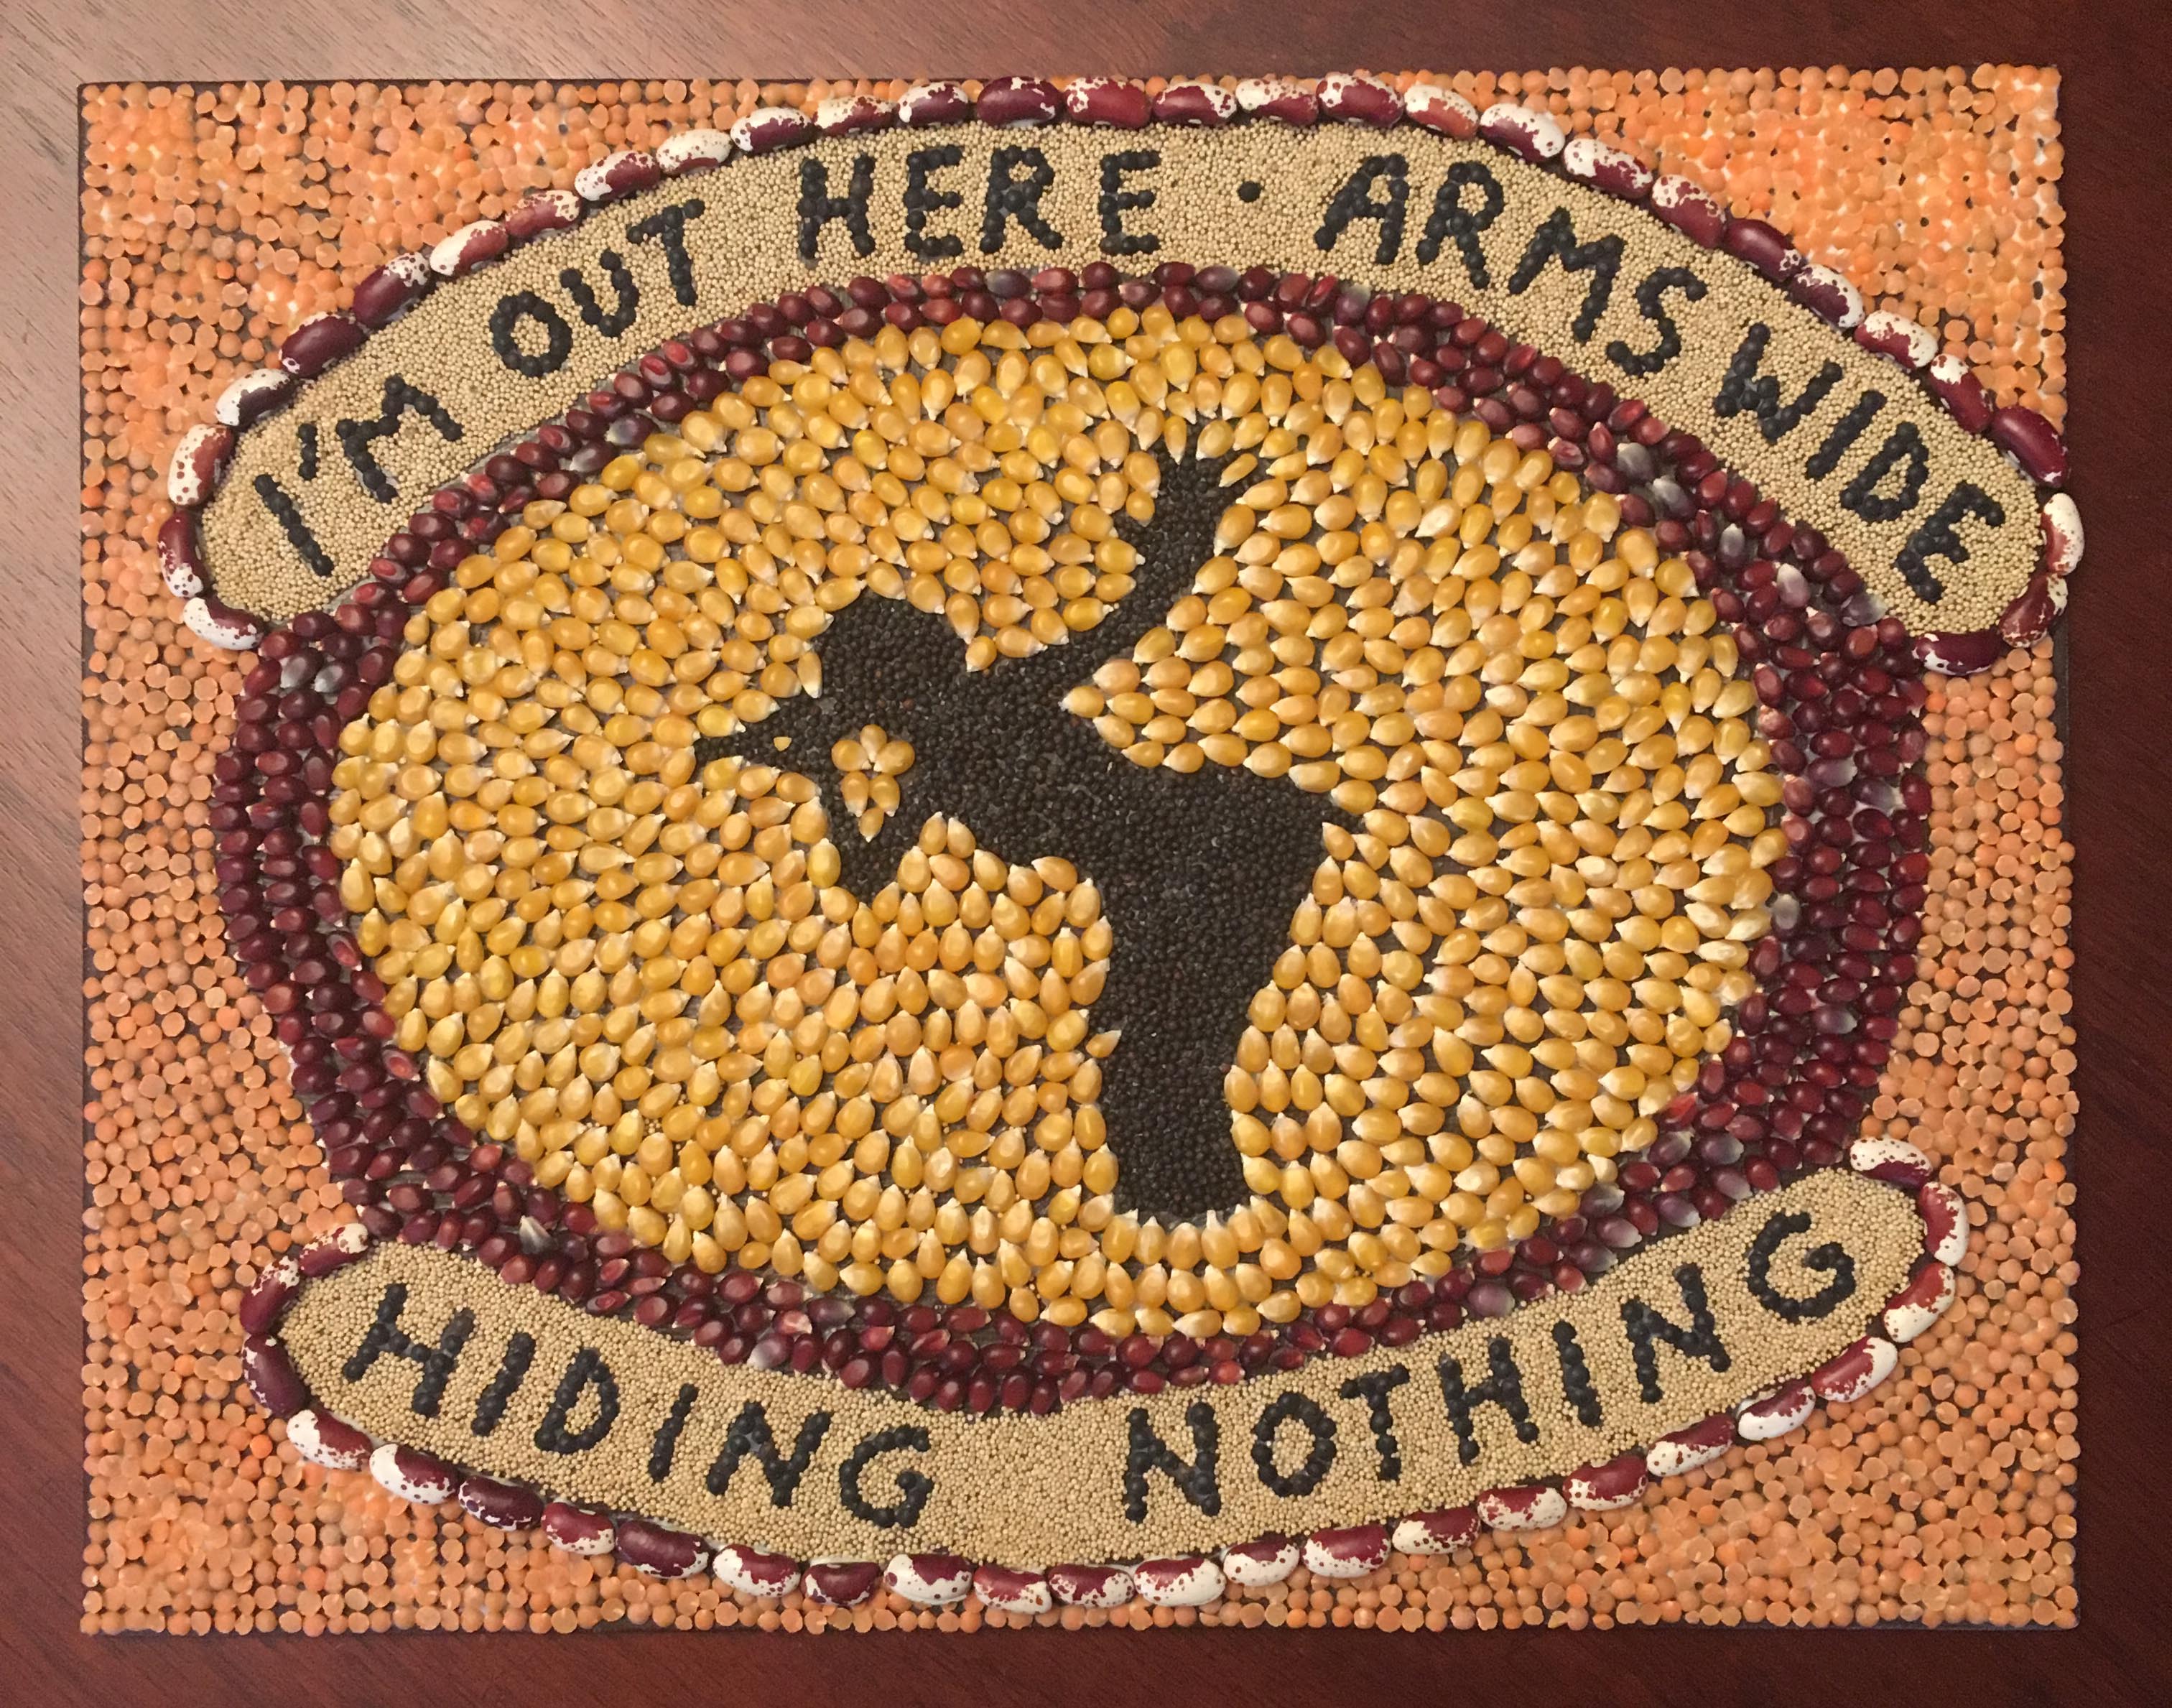 Seed art of "5 out of 6" lyrics by Christy Klancher.